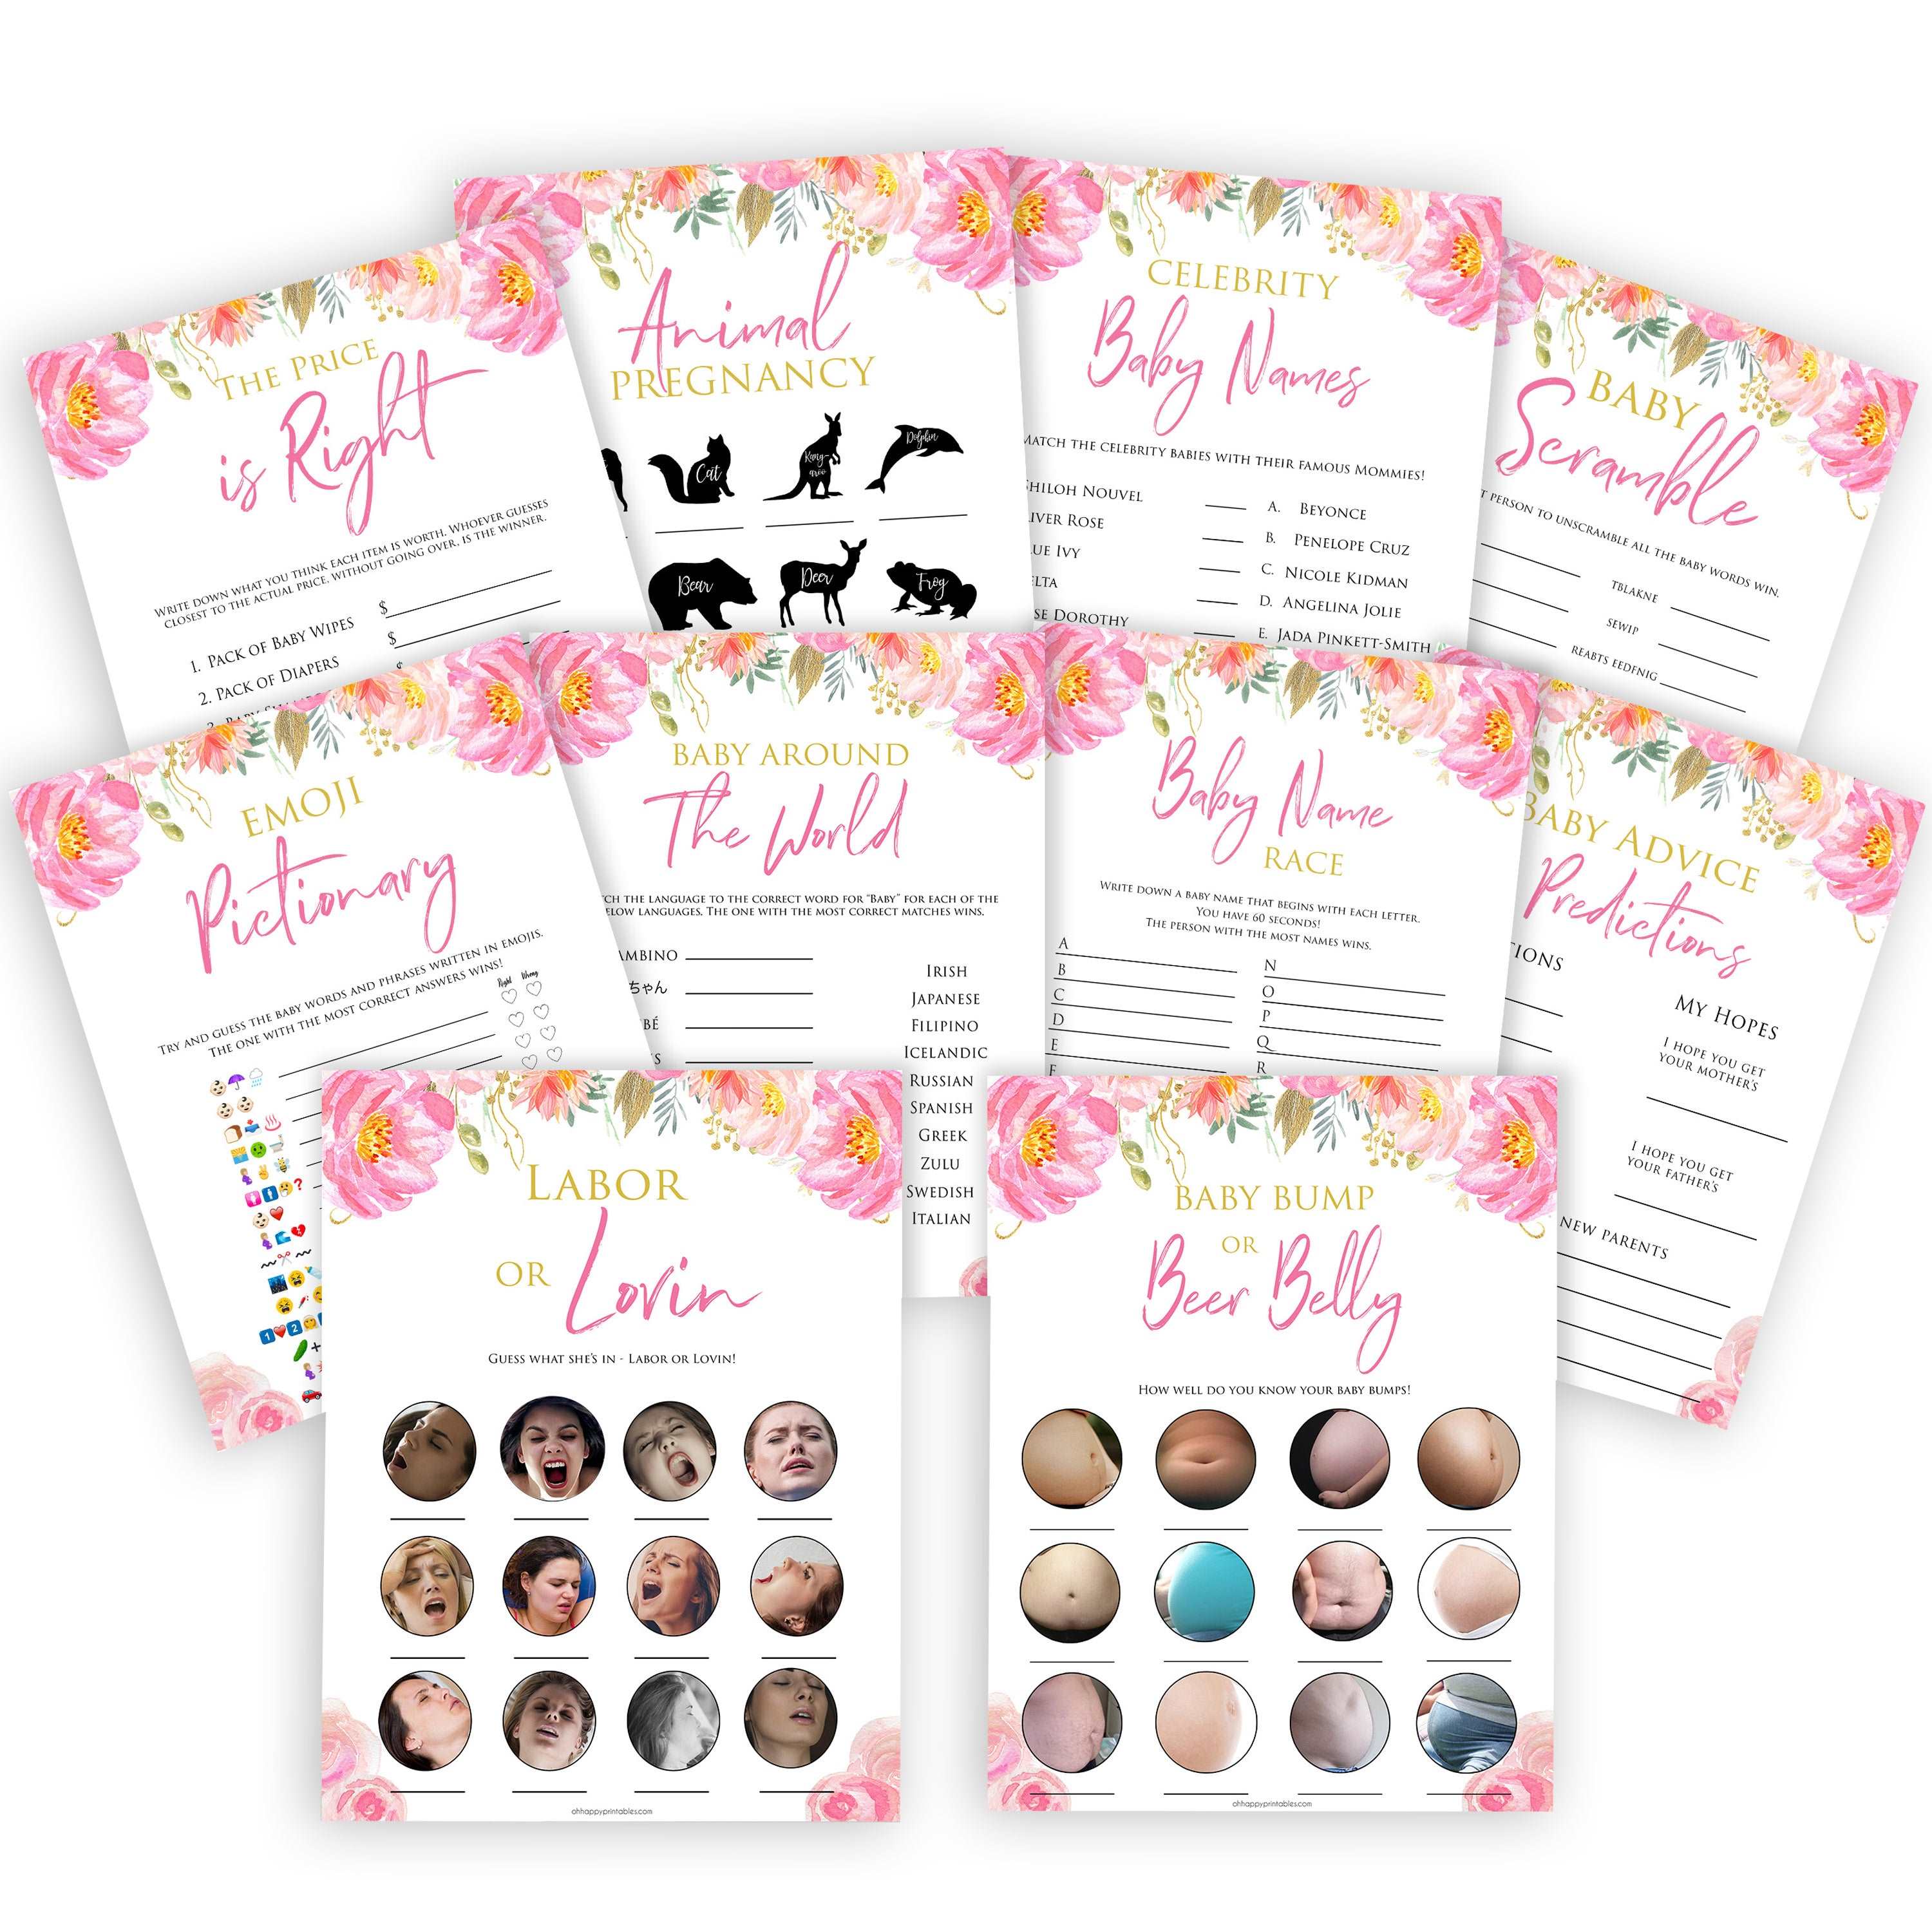 Pink blush floral baby shower game, 10 baby shower games, baby games bundle, printable baby games, baby shower games, blush baby shower, floral baby games, girl baby shower ideas, pink baby shower ideas, floral baby games, popular baby games, fun baby games